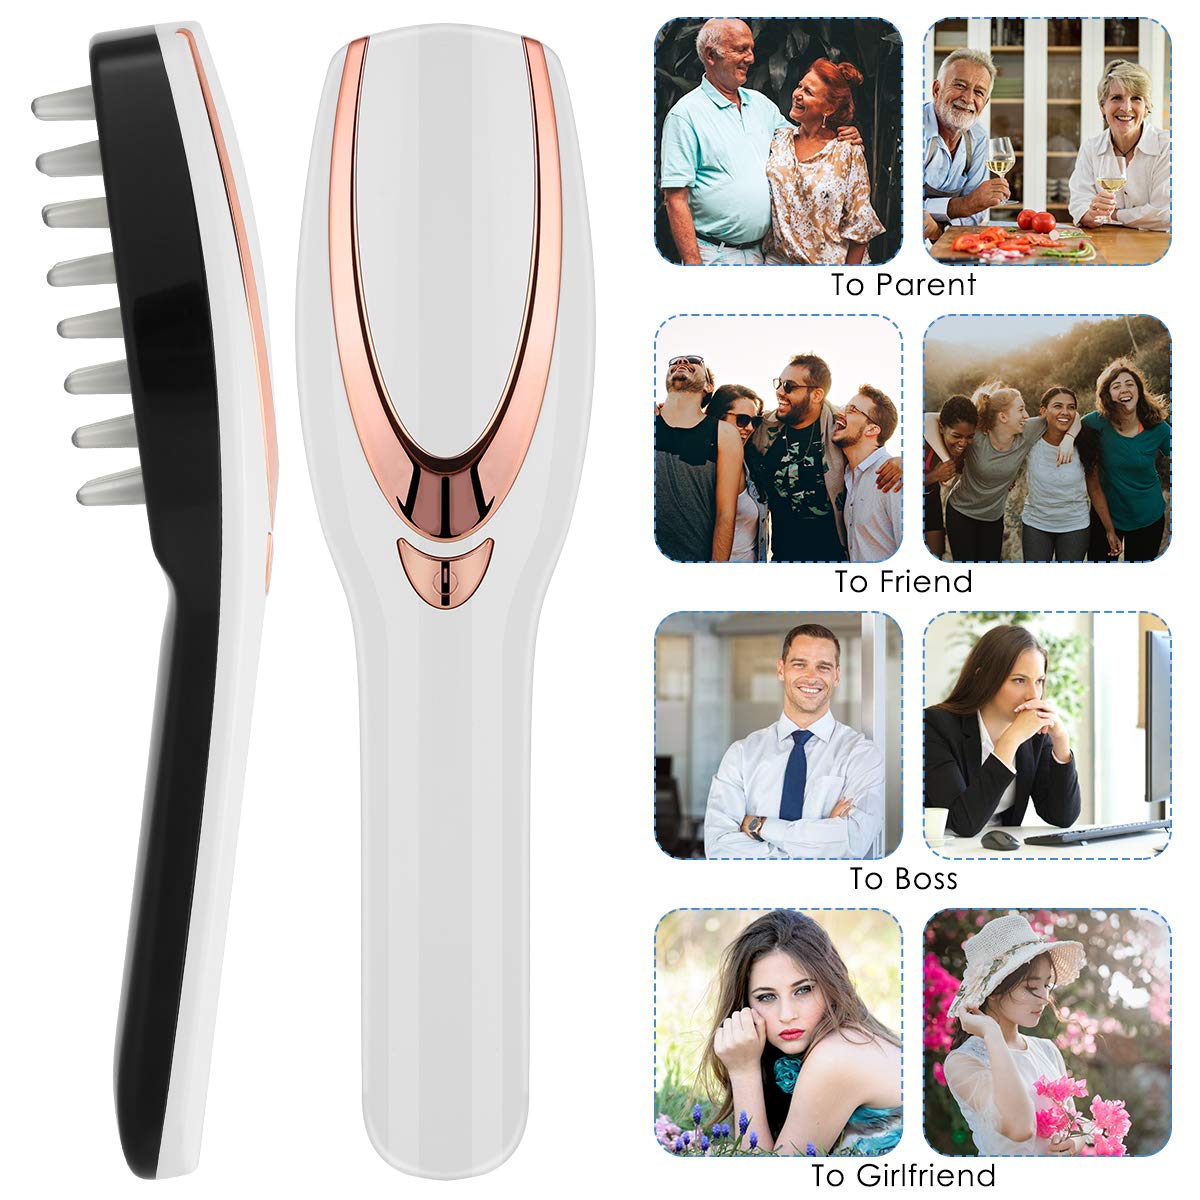 Peroptimist Phototherapy Hair Regrowth Brush, Scalp Massager Comb for Hair Growth, Anti Hair Loss Head Care Electric Massage Comb Brush with USB Rechargeable - image 4 of 8